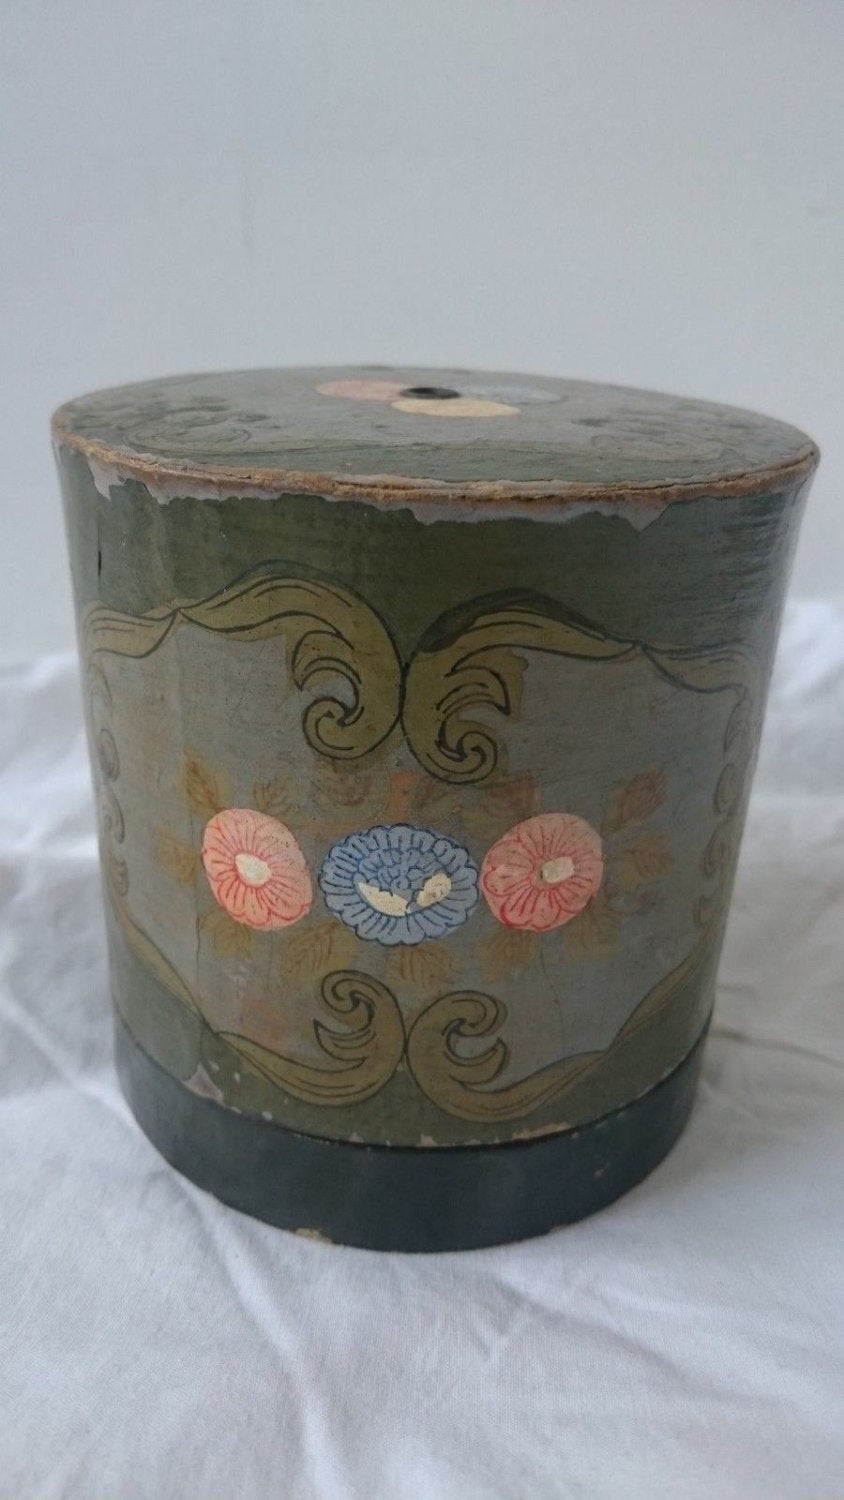 Antique Art Nouveau String Yarn or Twine Holder Box  Late 1800's - Early 1900's Hand Painted Original Vintage Victorian